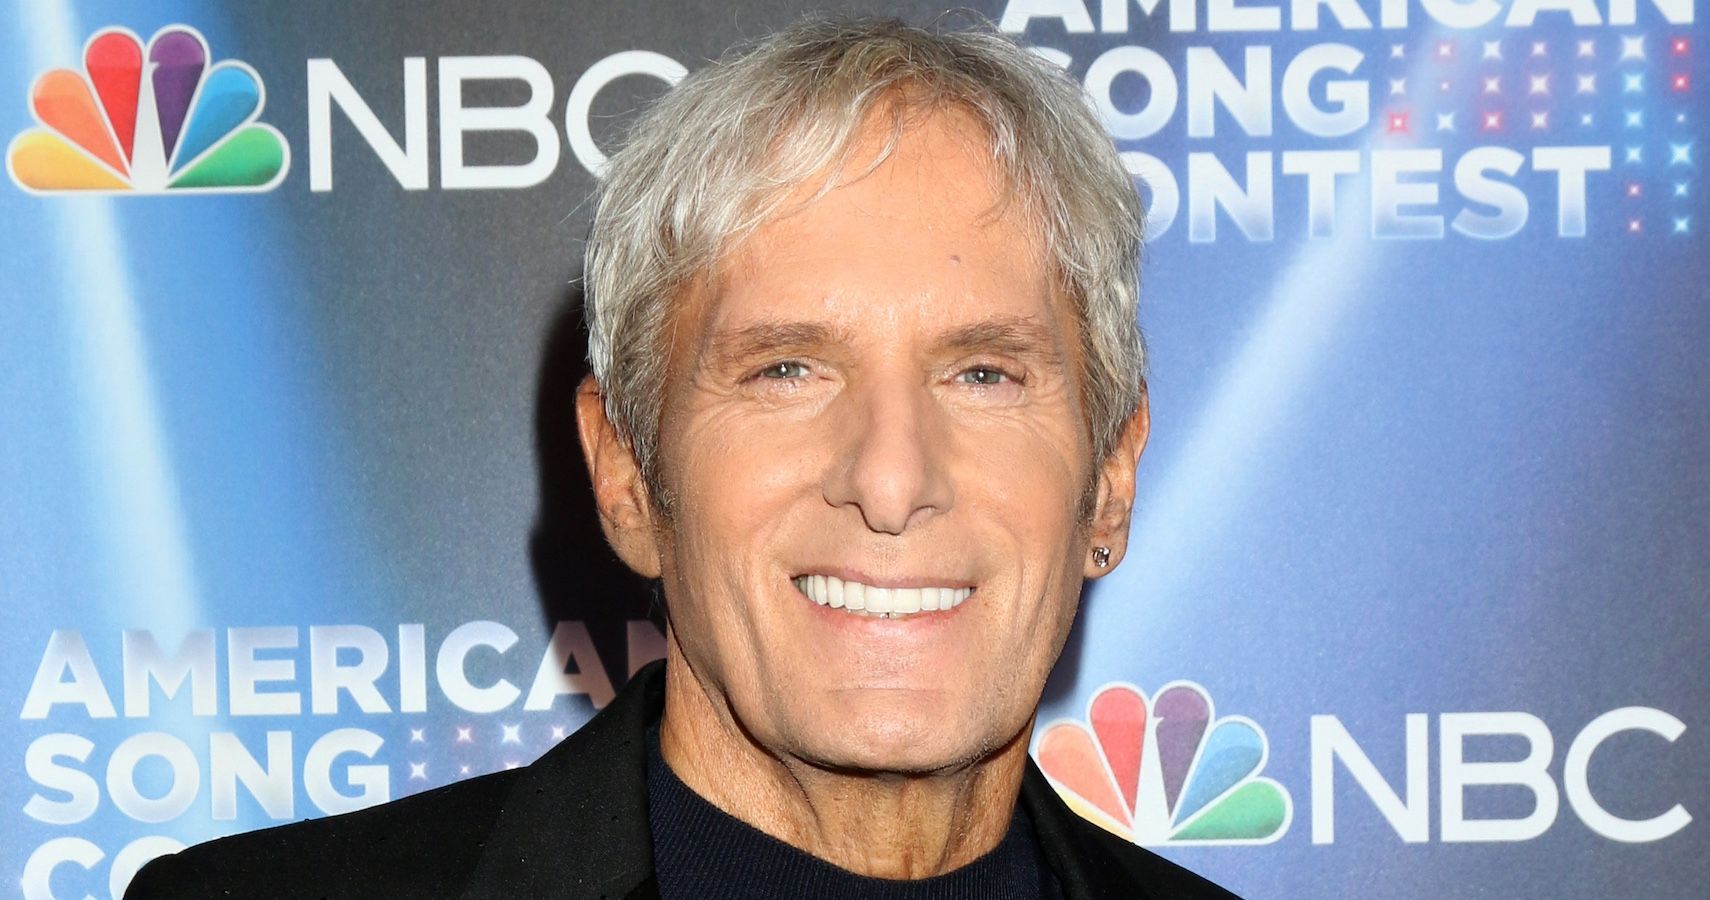 Michael Bolton Reveals He’s Taking A Break From Music As He Gives ...